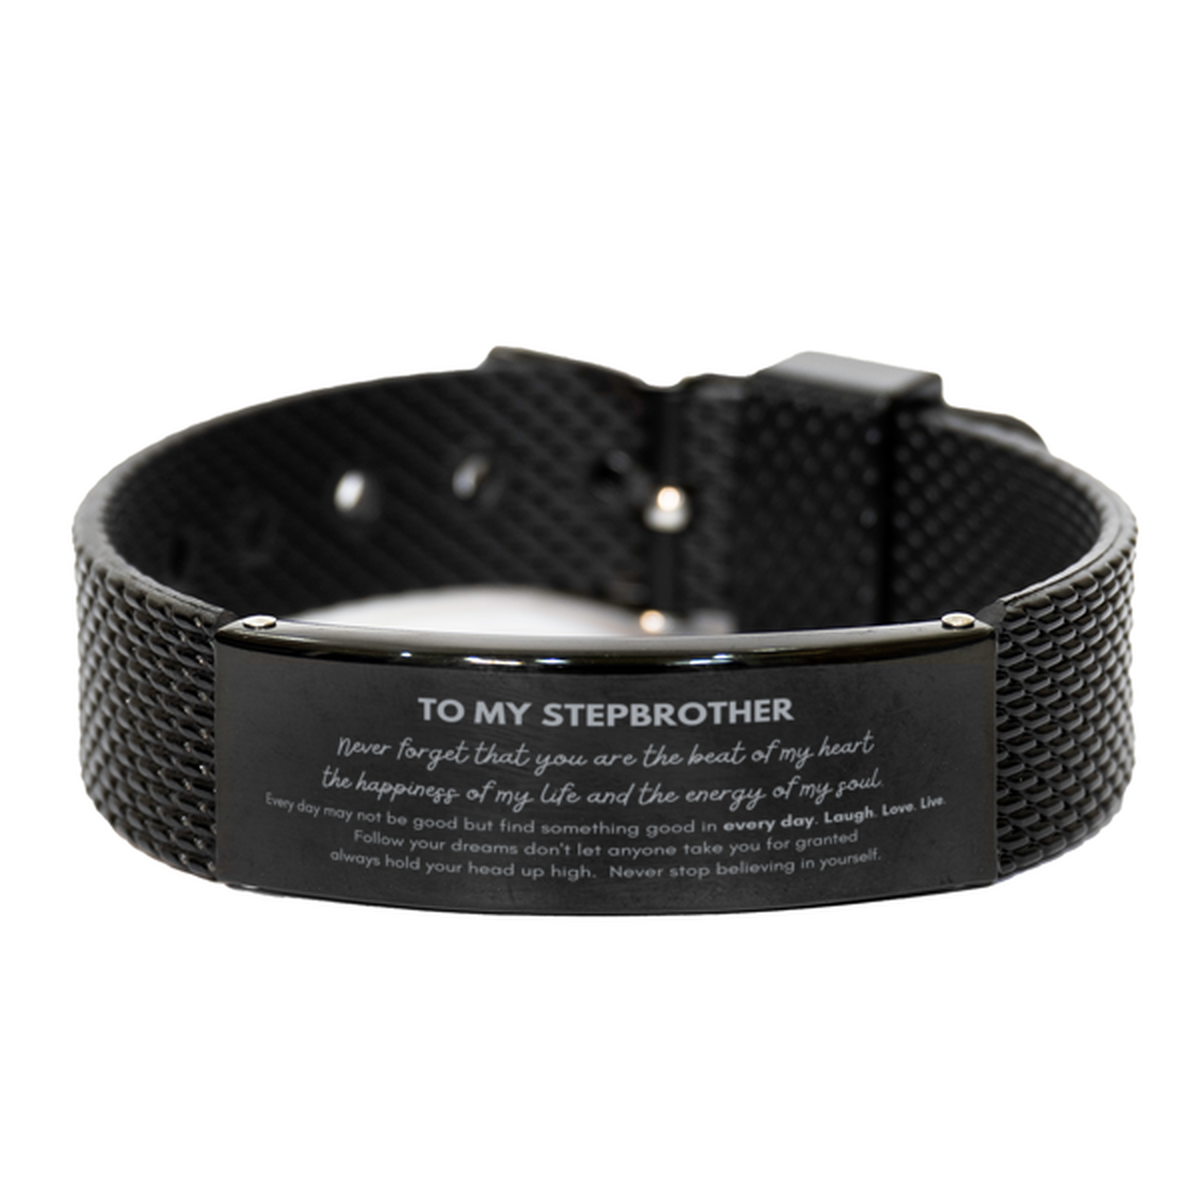 To My Stepbrother Bracelet Gifts, Christmas Stepbrother Black Shark Mesh Bracelet Present, Birthday Unique Motivational For Stepbrother, To My Stepbrother Never forget that you are the beat of my heart the happiness of my life and the energy of my soul